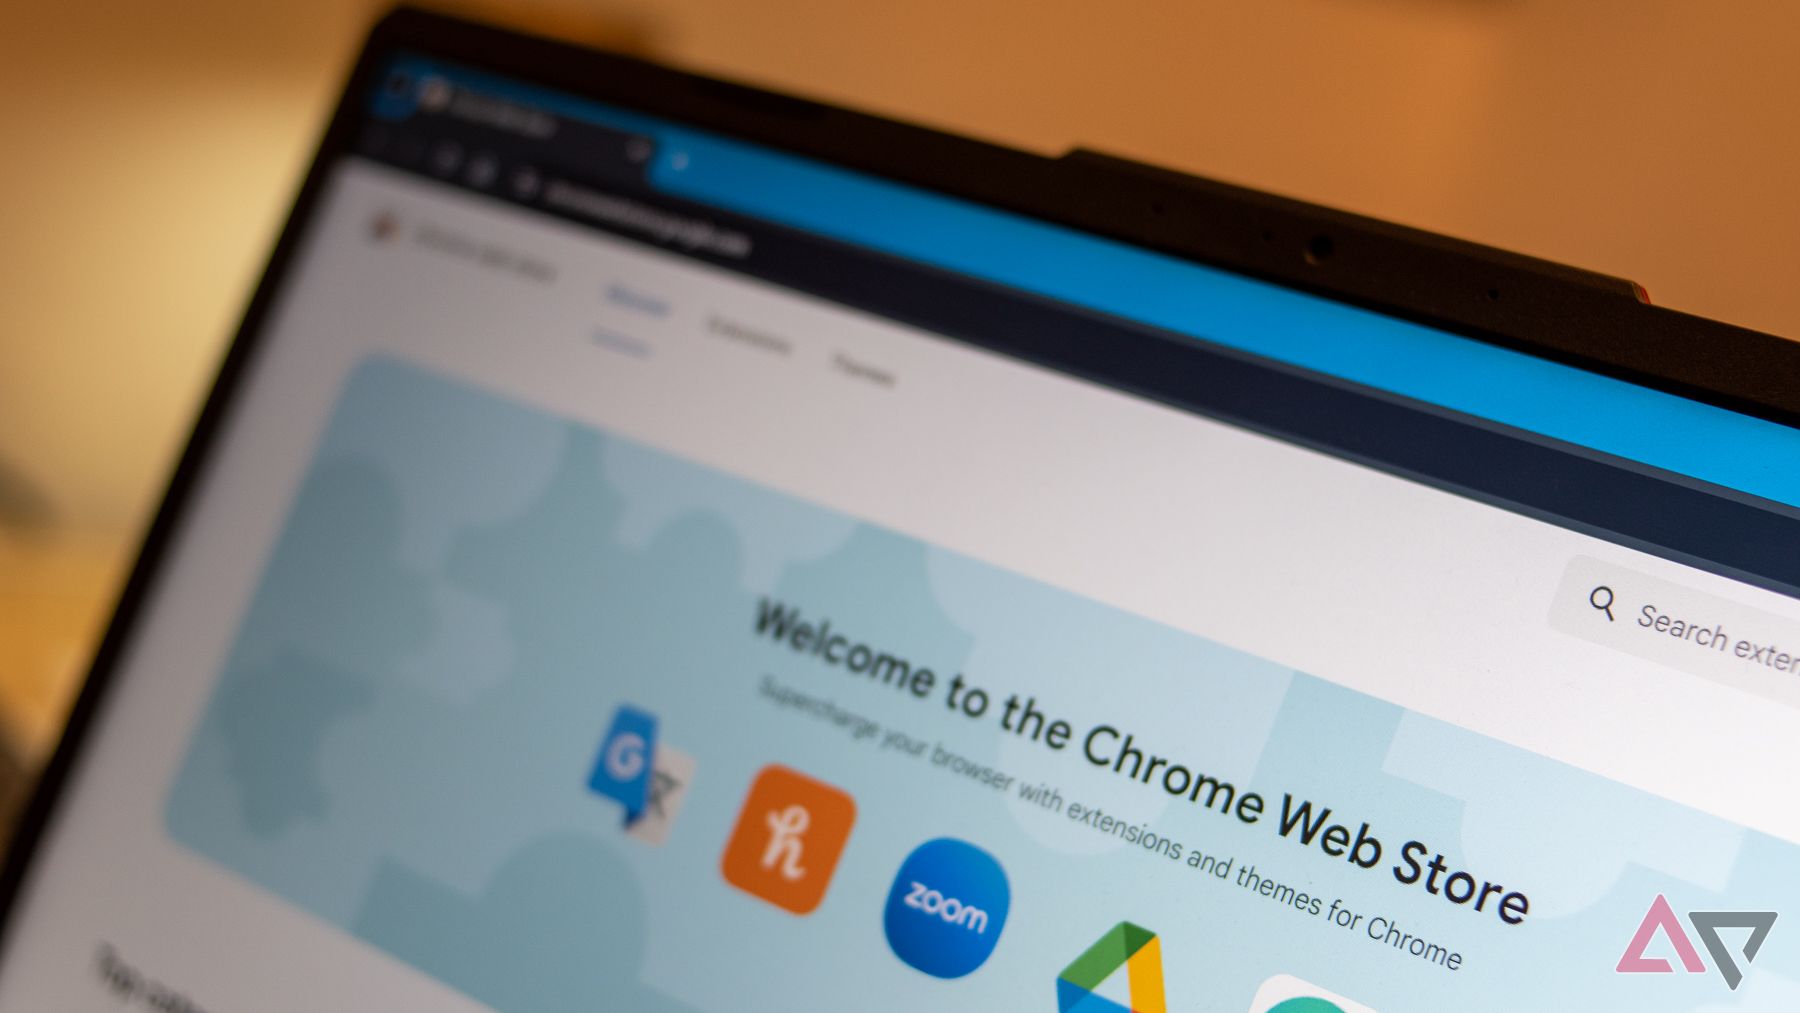 chrome web store redesigned homepage